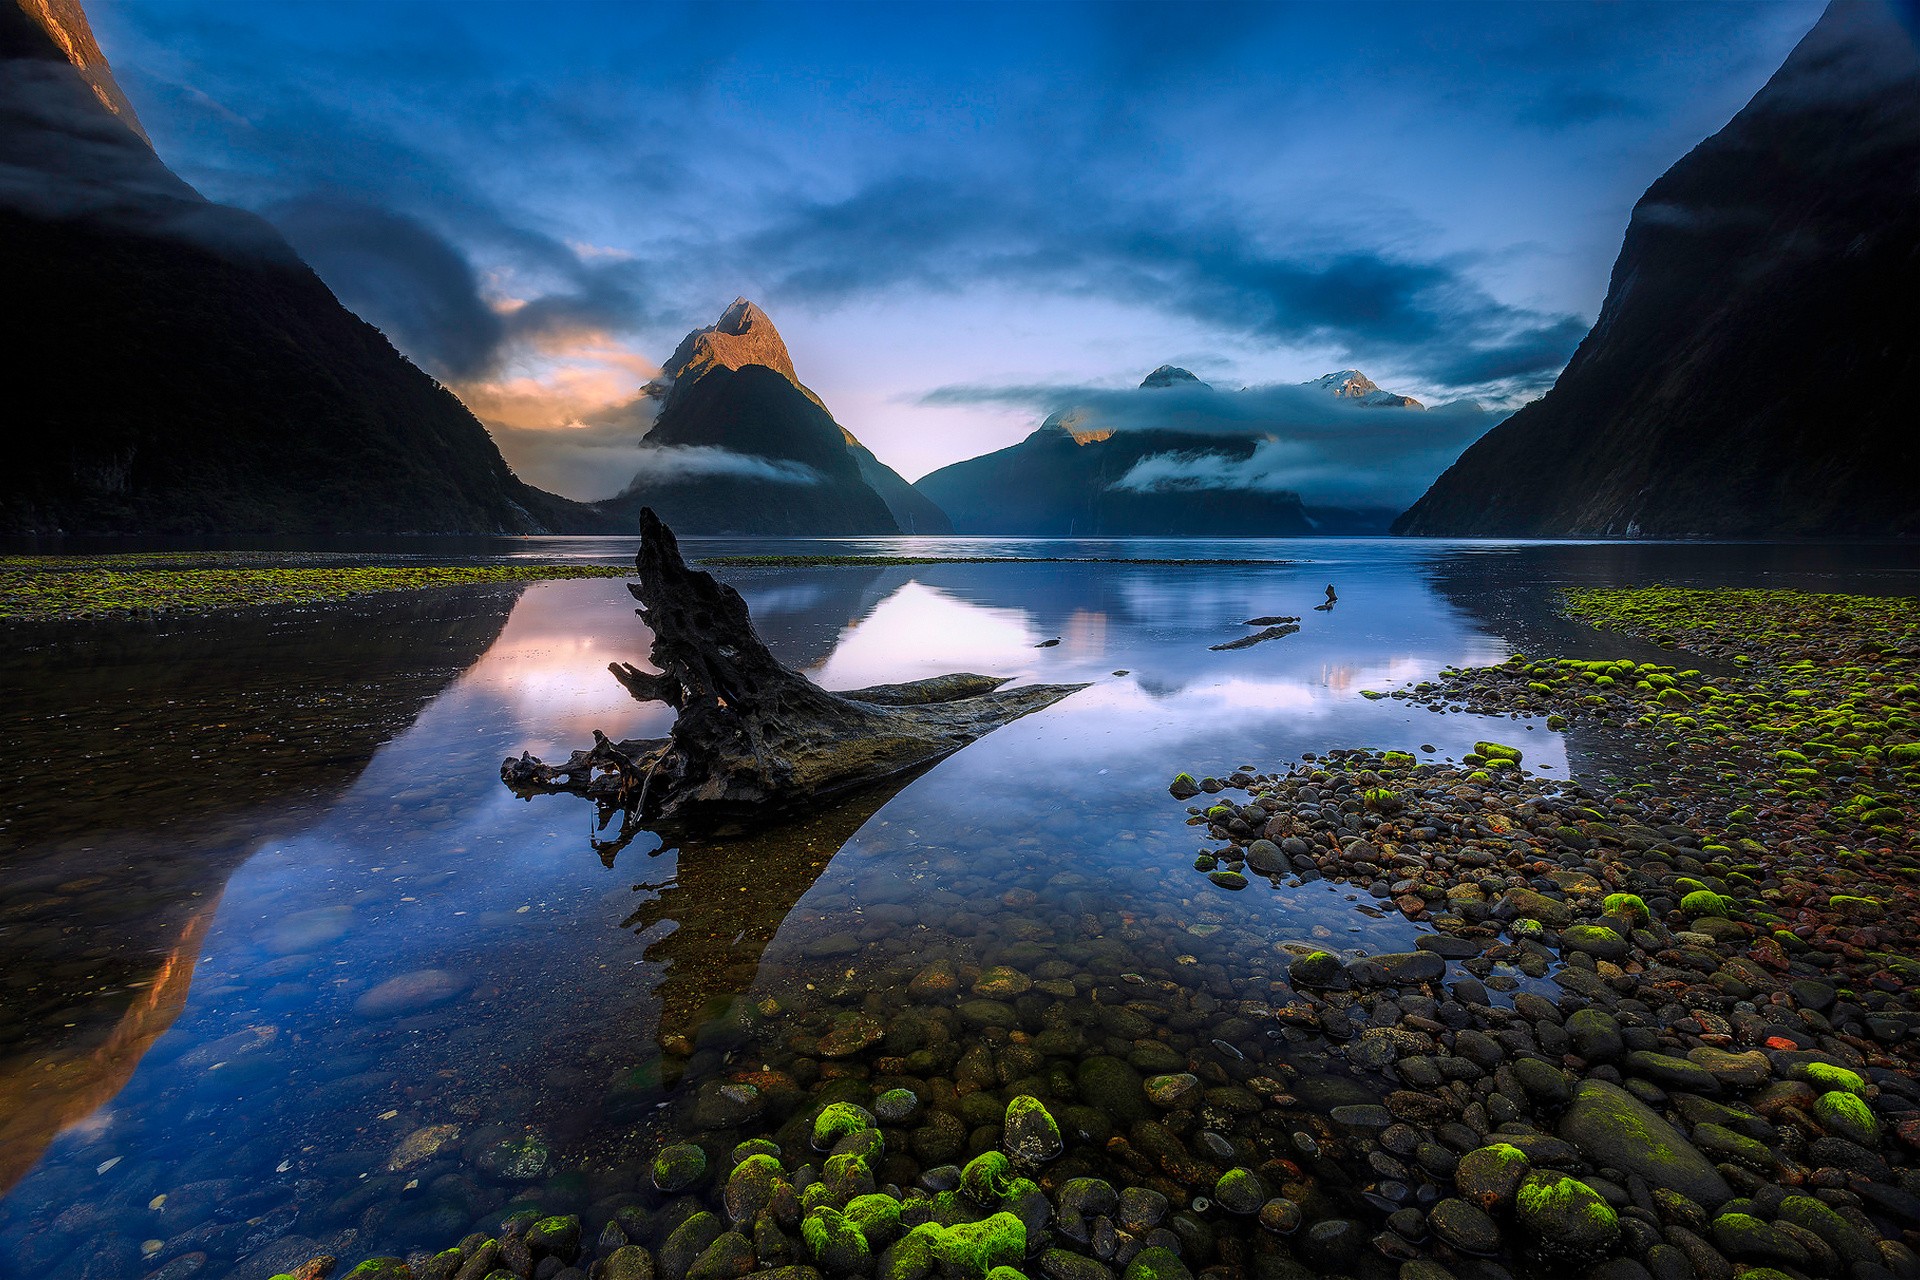 General 1920x1280 nature landscape water clouds New Zealand lake dead trees stones moss mountains reflection